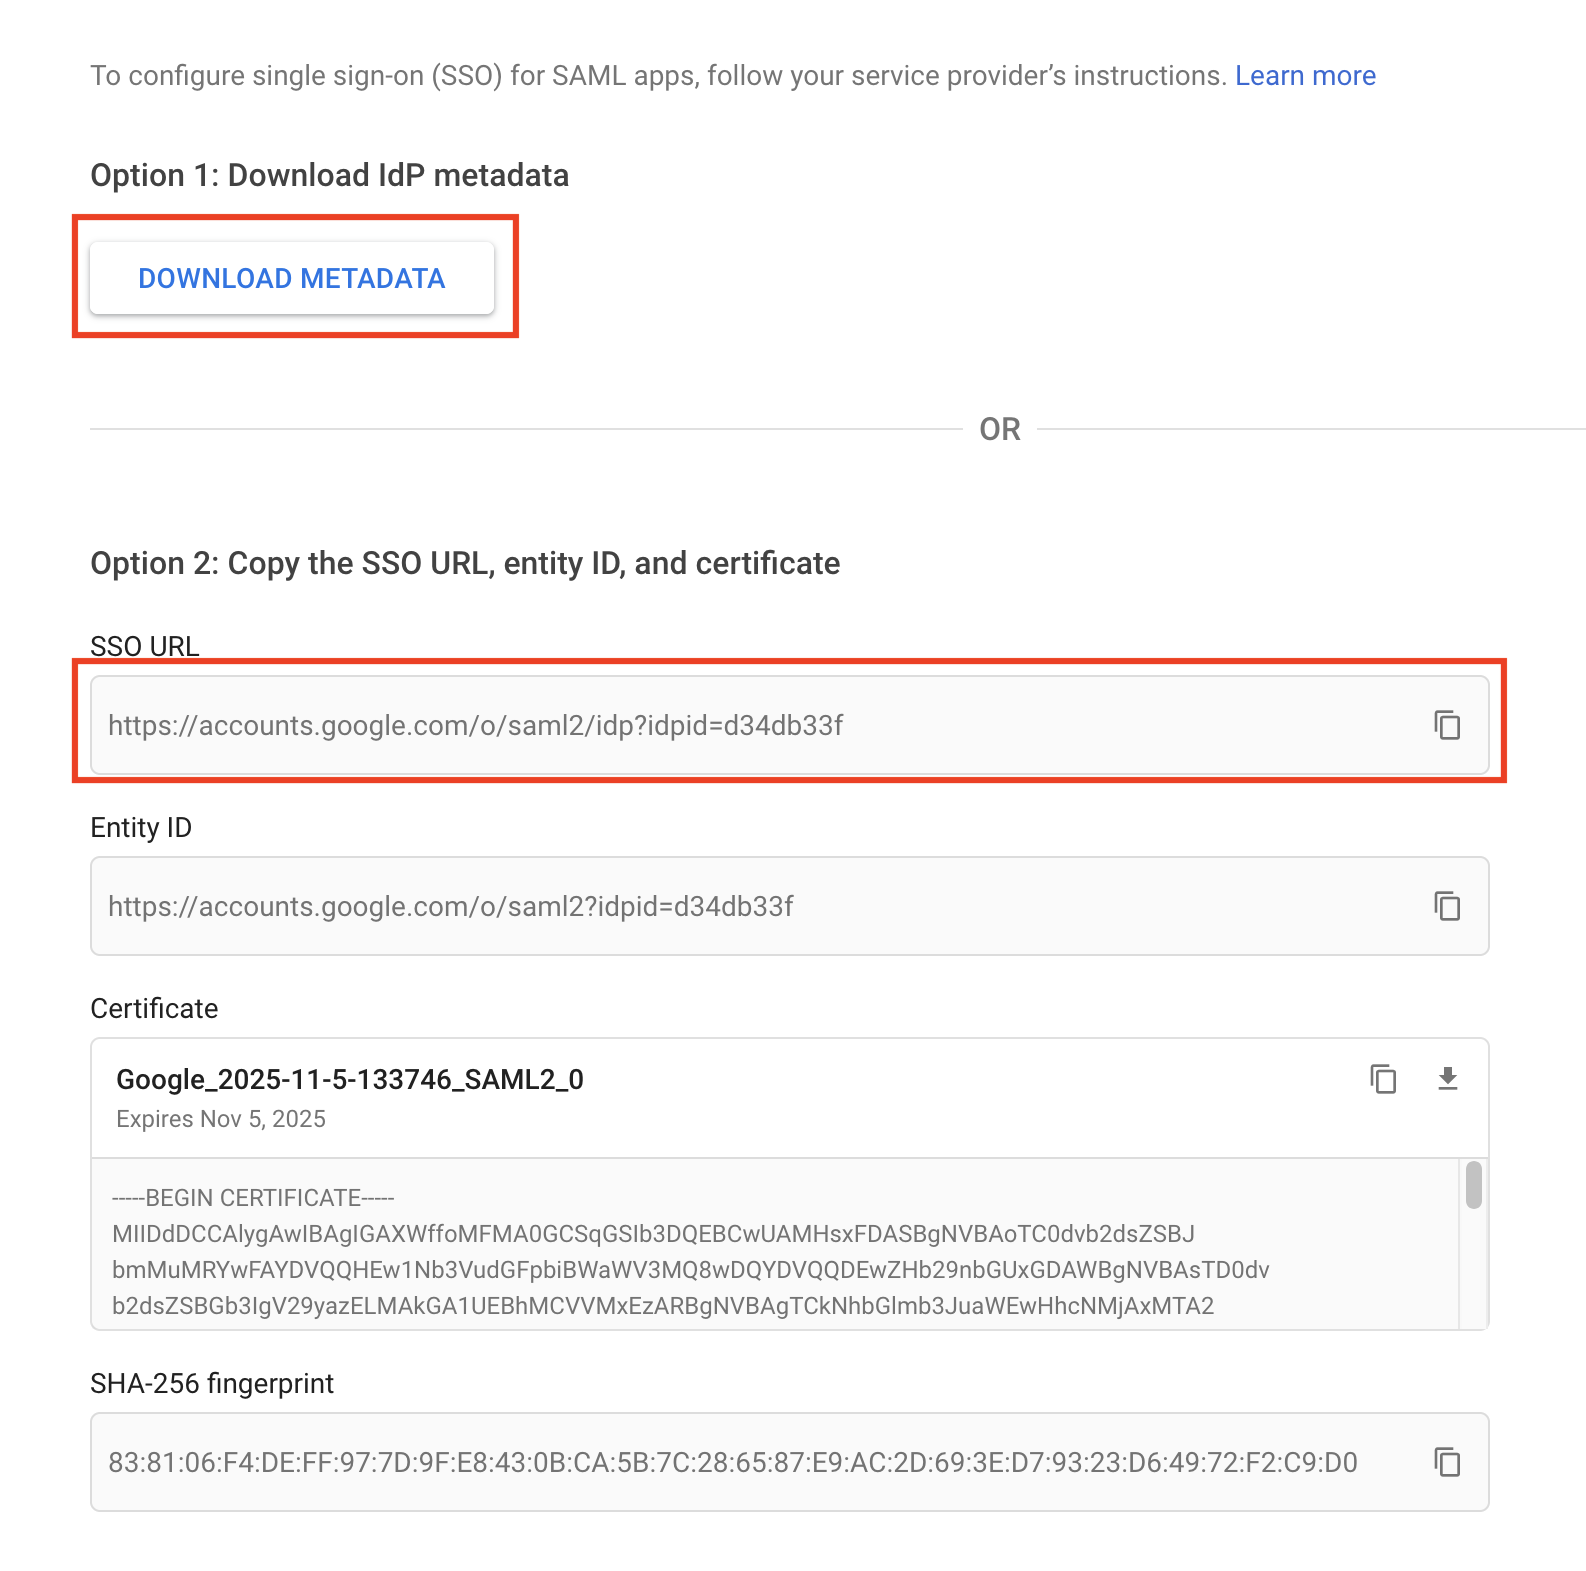 Download metadata and copy the SSO URL